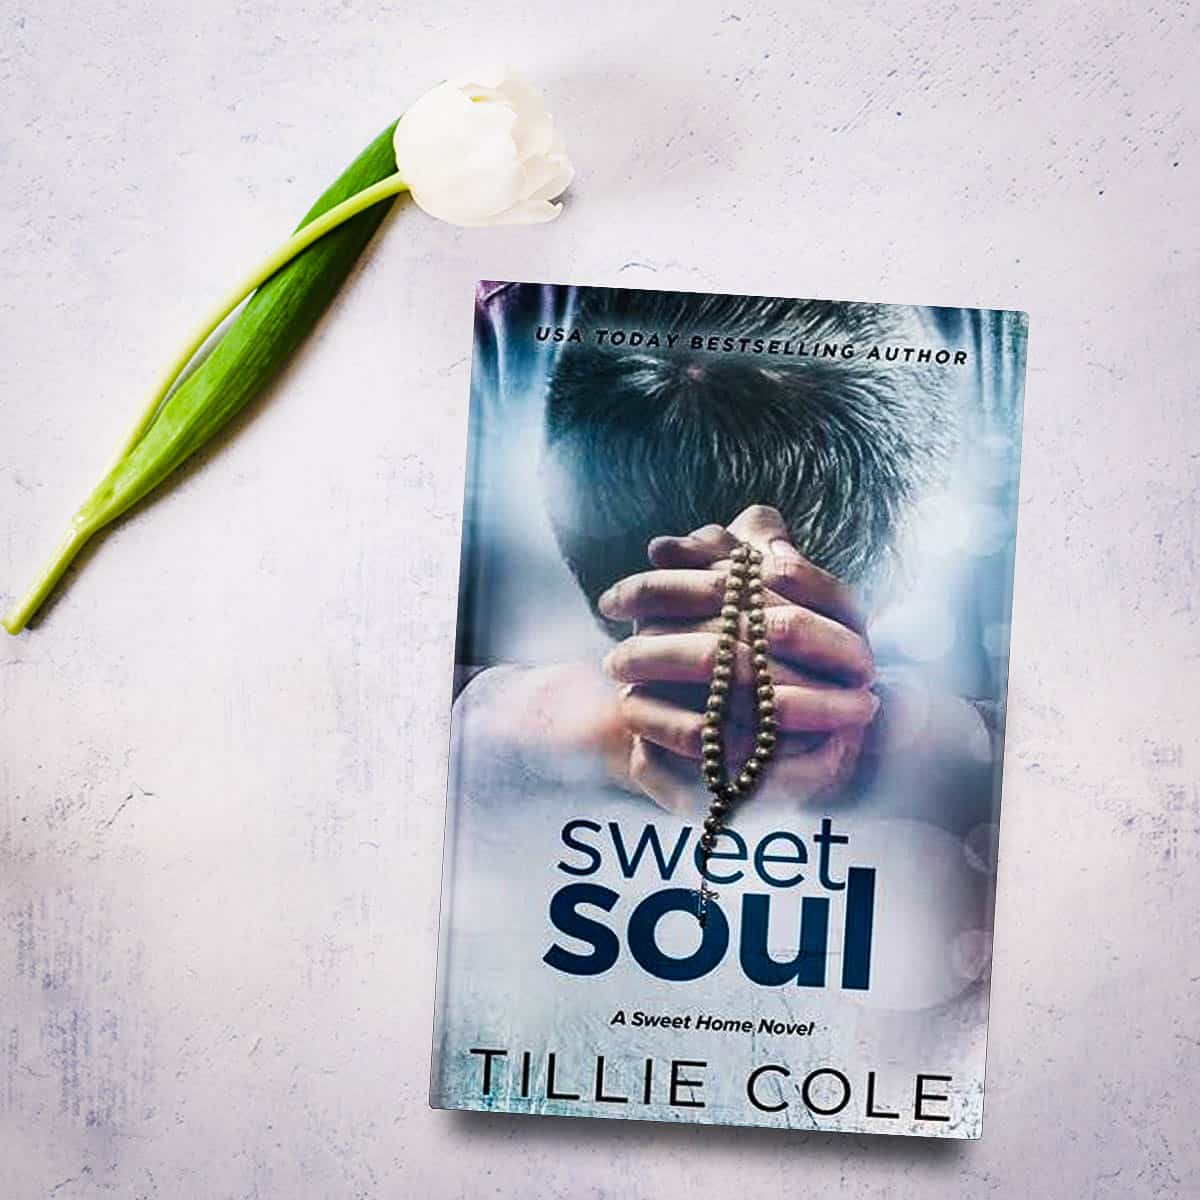 Sweet Soul by Tillie Cole is the last book in the Sweet Home series and it's a highly emotional and very sweet story about the youngest brother, Levi, and the homeless girl he falls in love with.